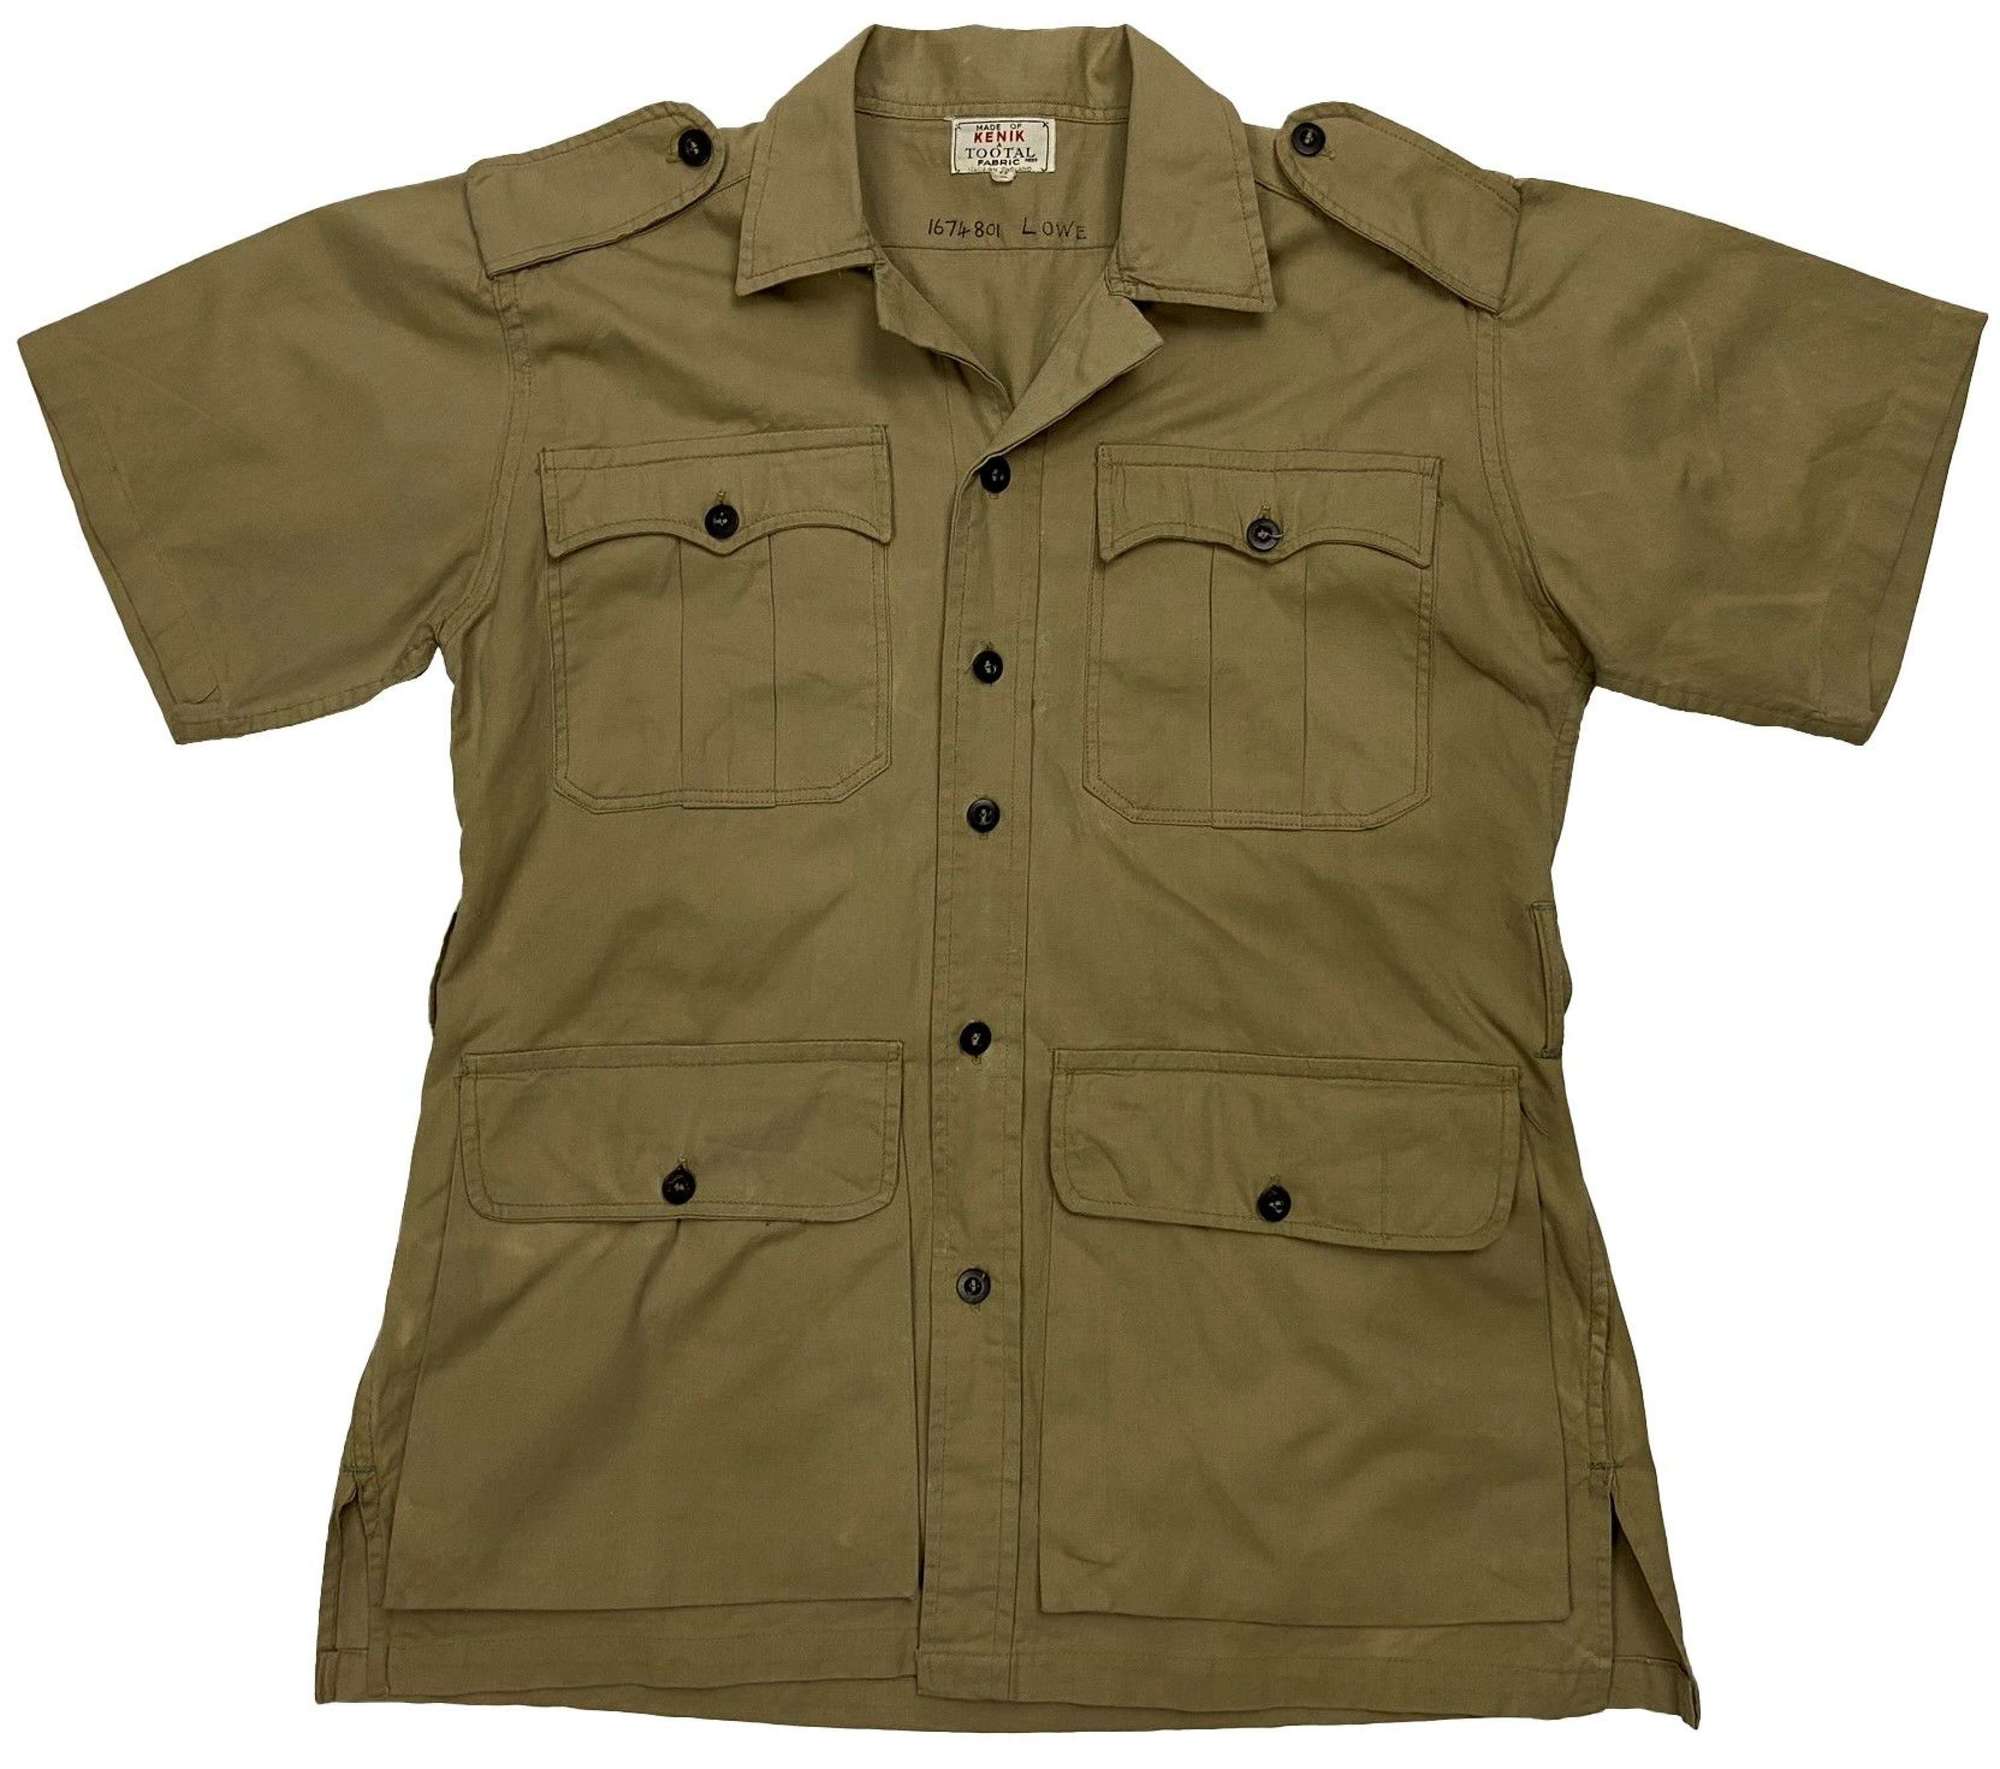 Original 1950s Private Purchase Khaki Drill Bush Jacket by 'Tootal'